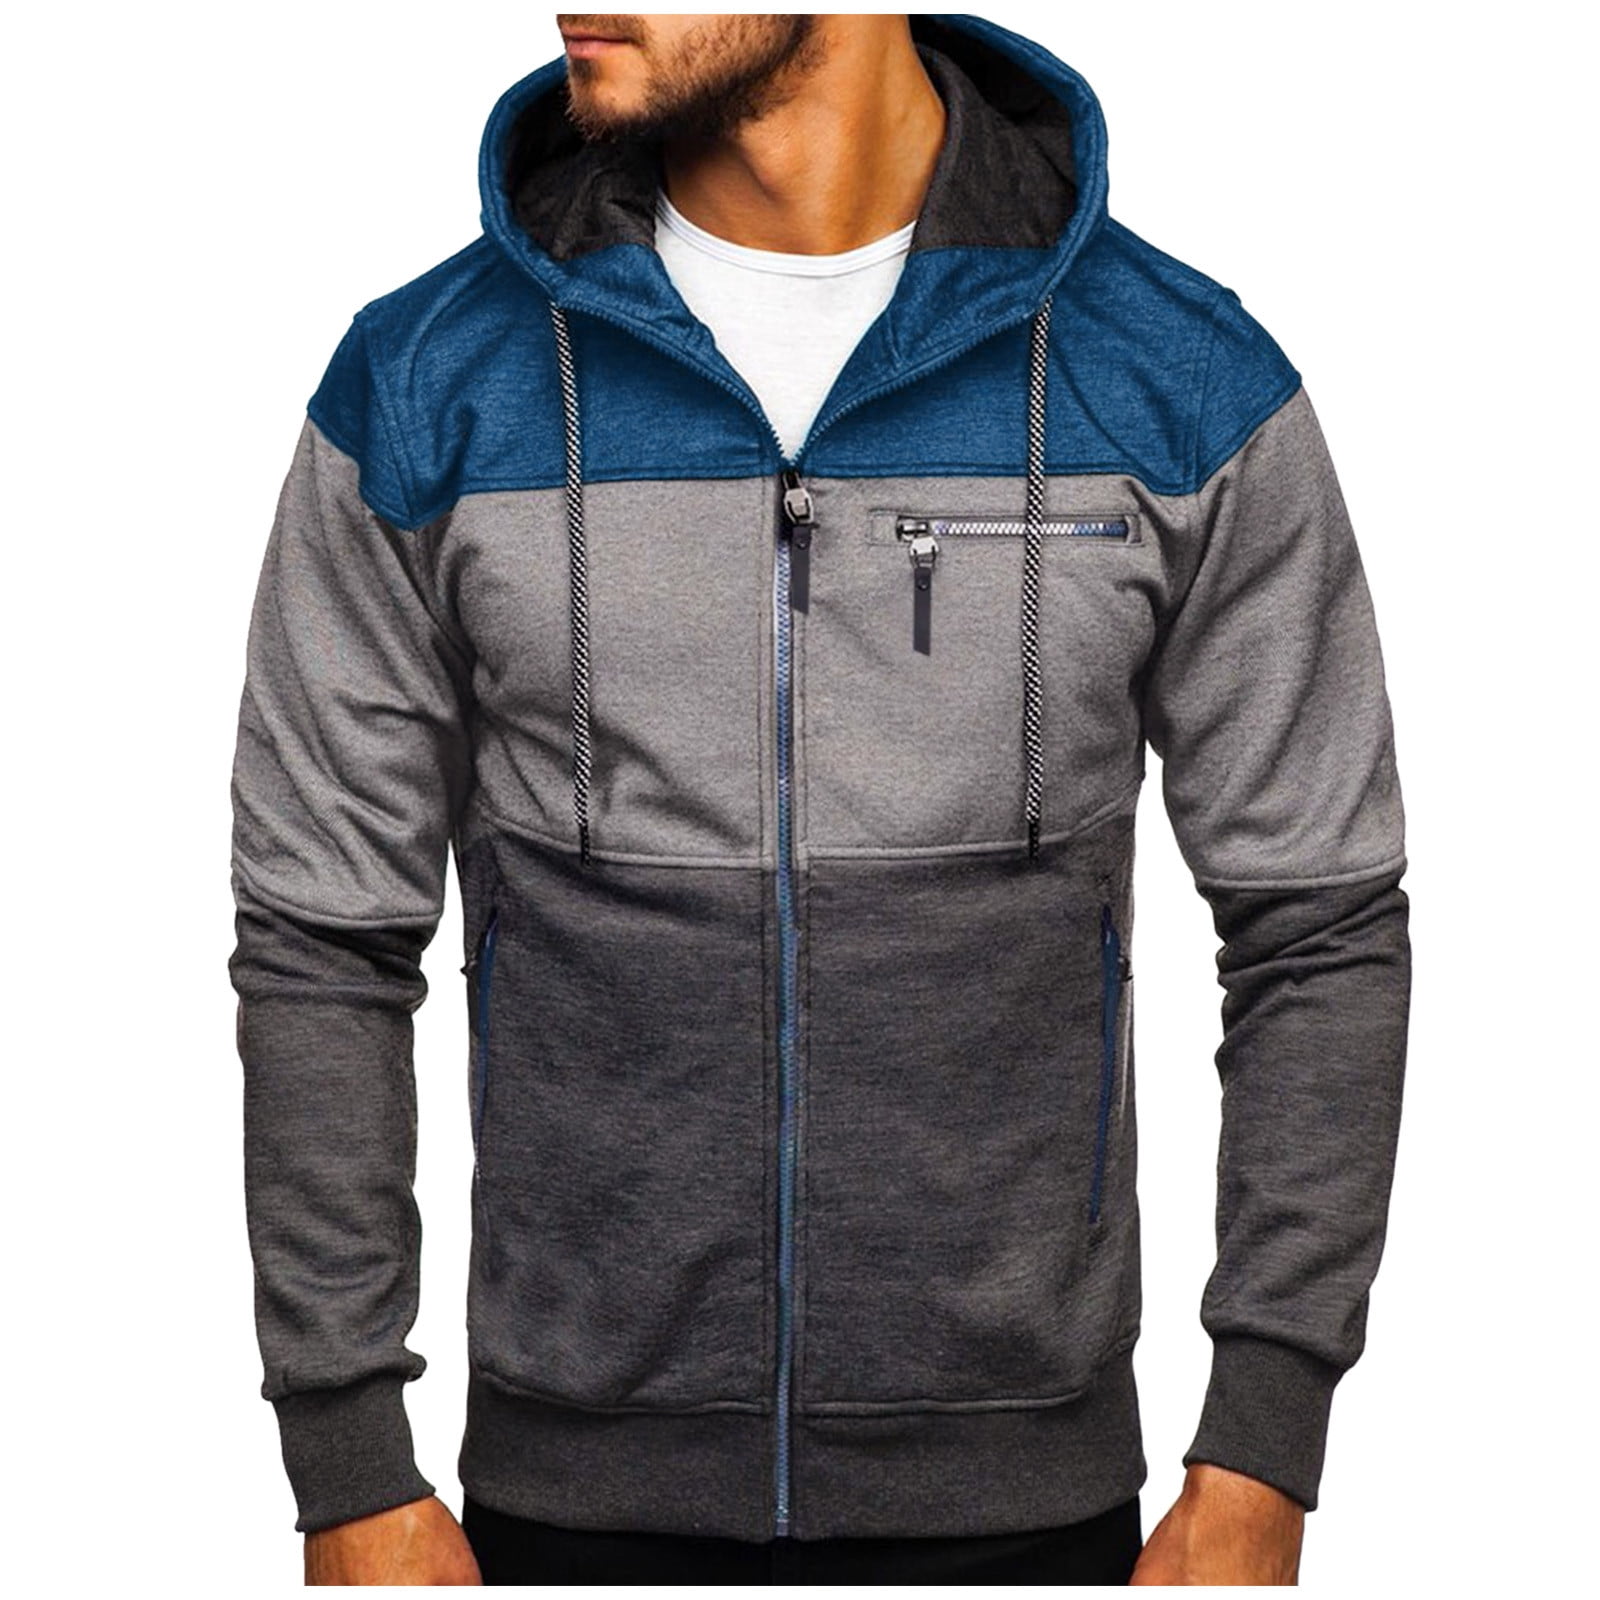 Stsed Mens Jackets Young Casual Knit Sweater Zipper Kangaroo Pocket Hooded 